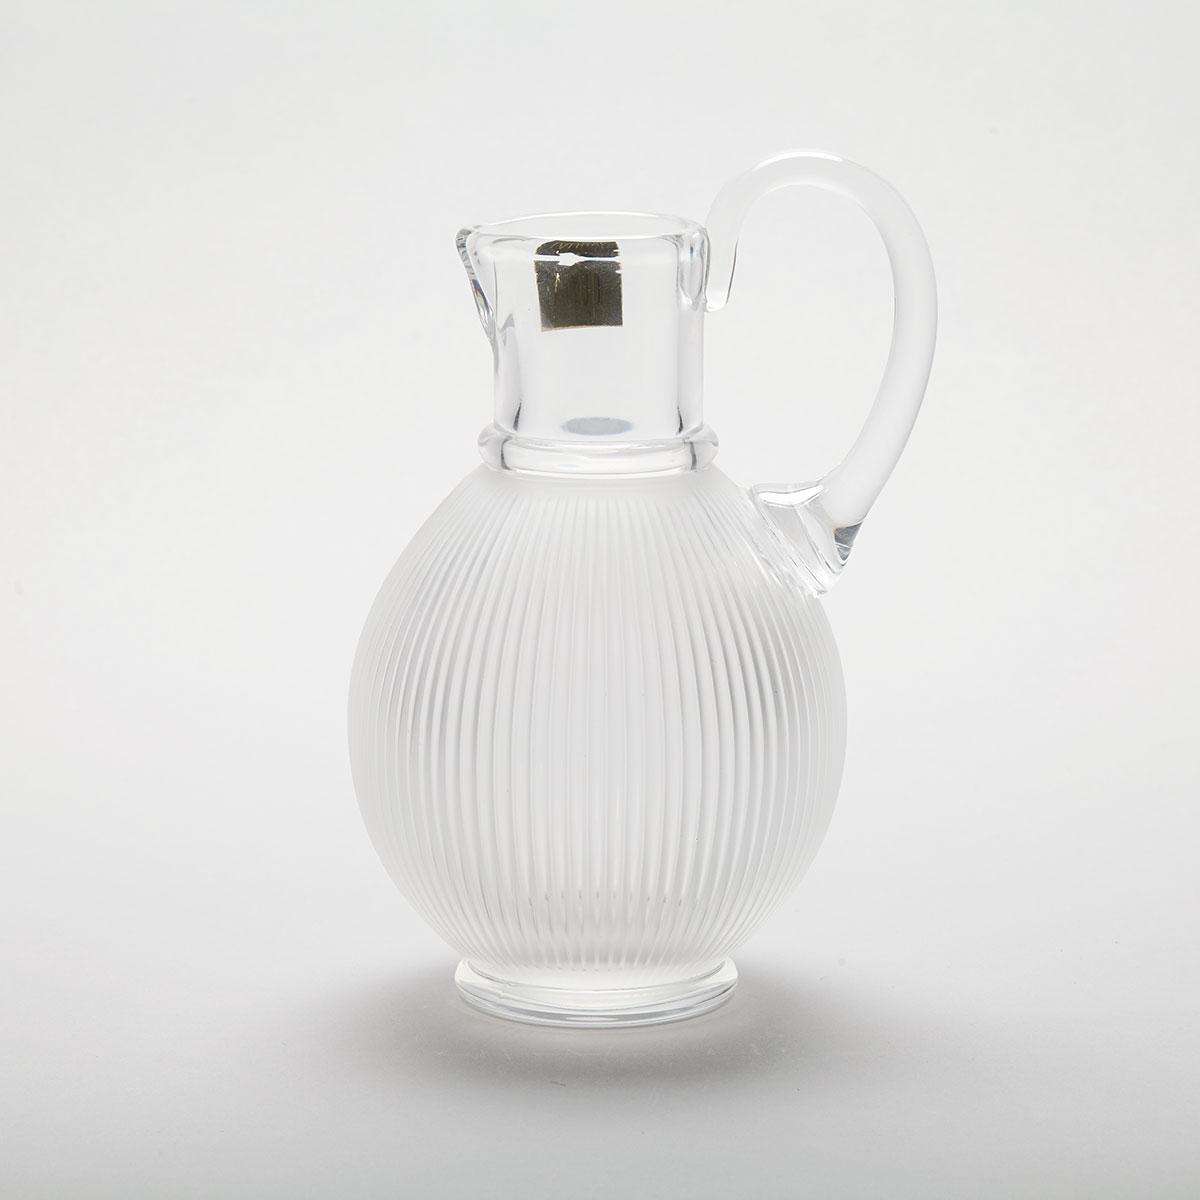 ‘Langeais’, Lalique Moulded and Partly Frosted Glass Water Jug, post-1945